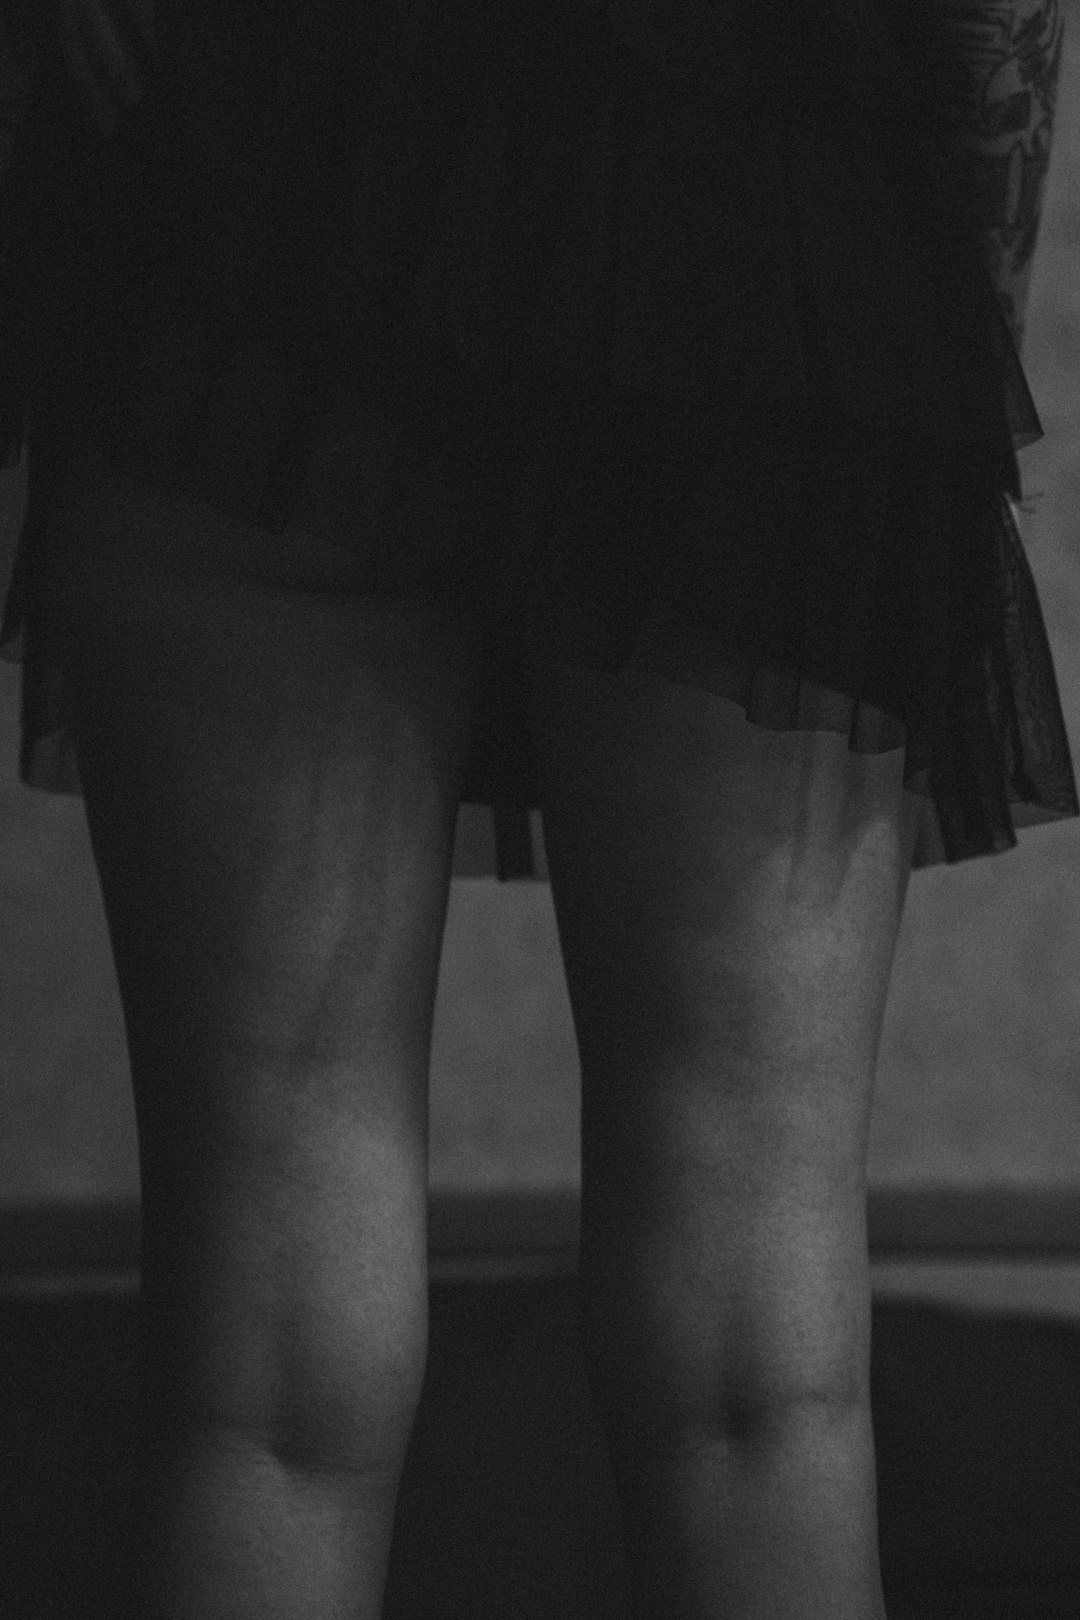 grayscale photo of woman in black skirt